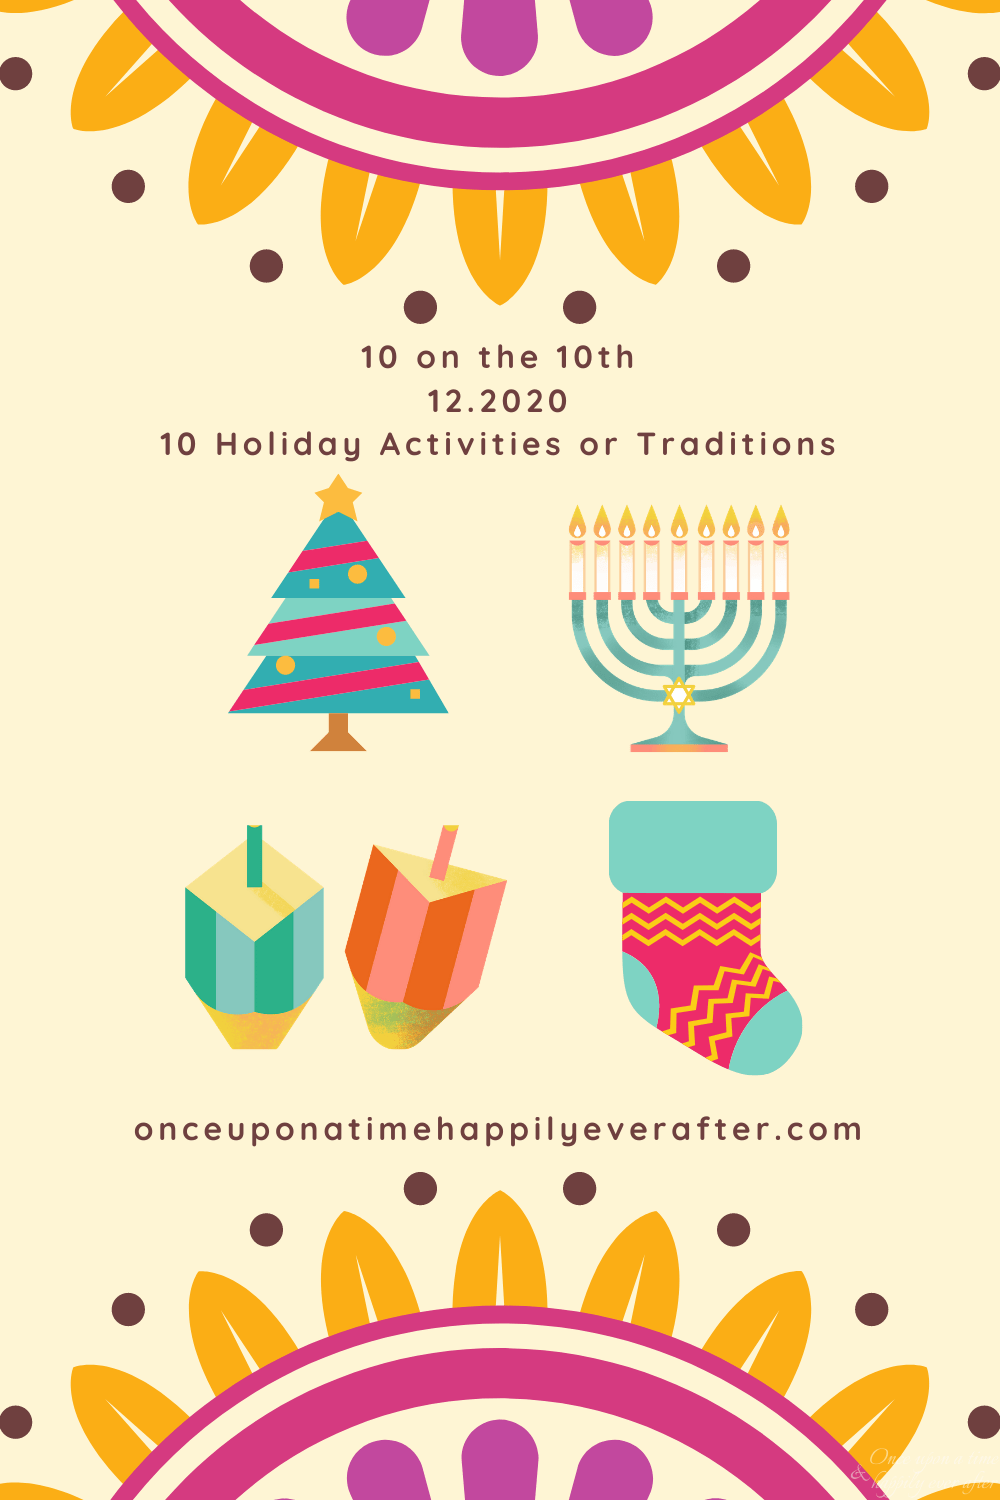 10 Holiday Activities or Traditions